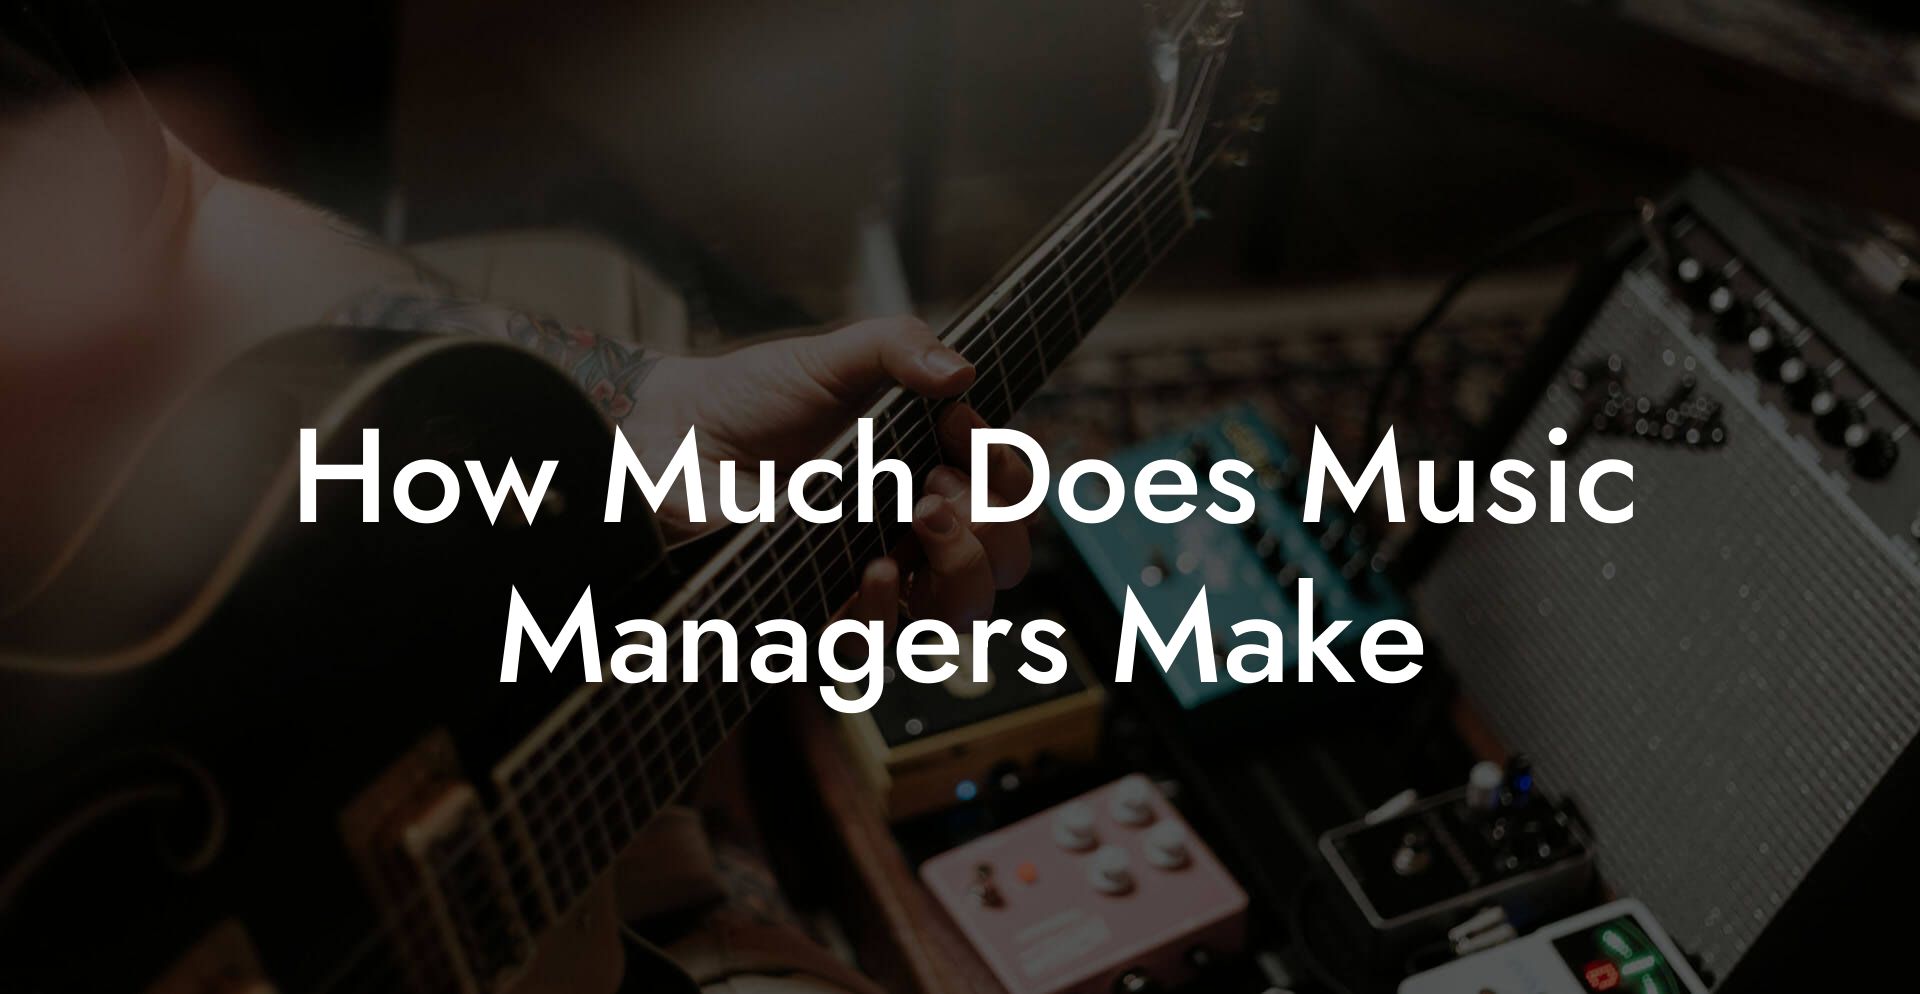 How Much Does Music Managers Make